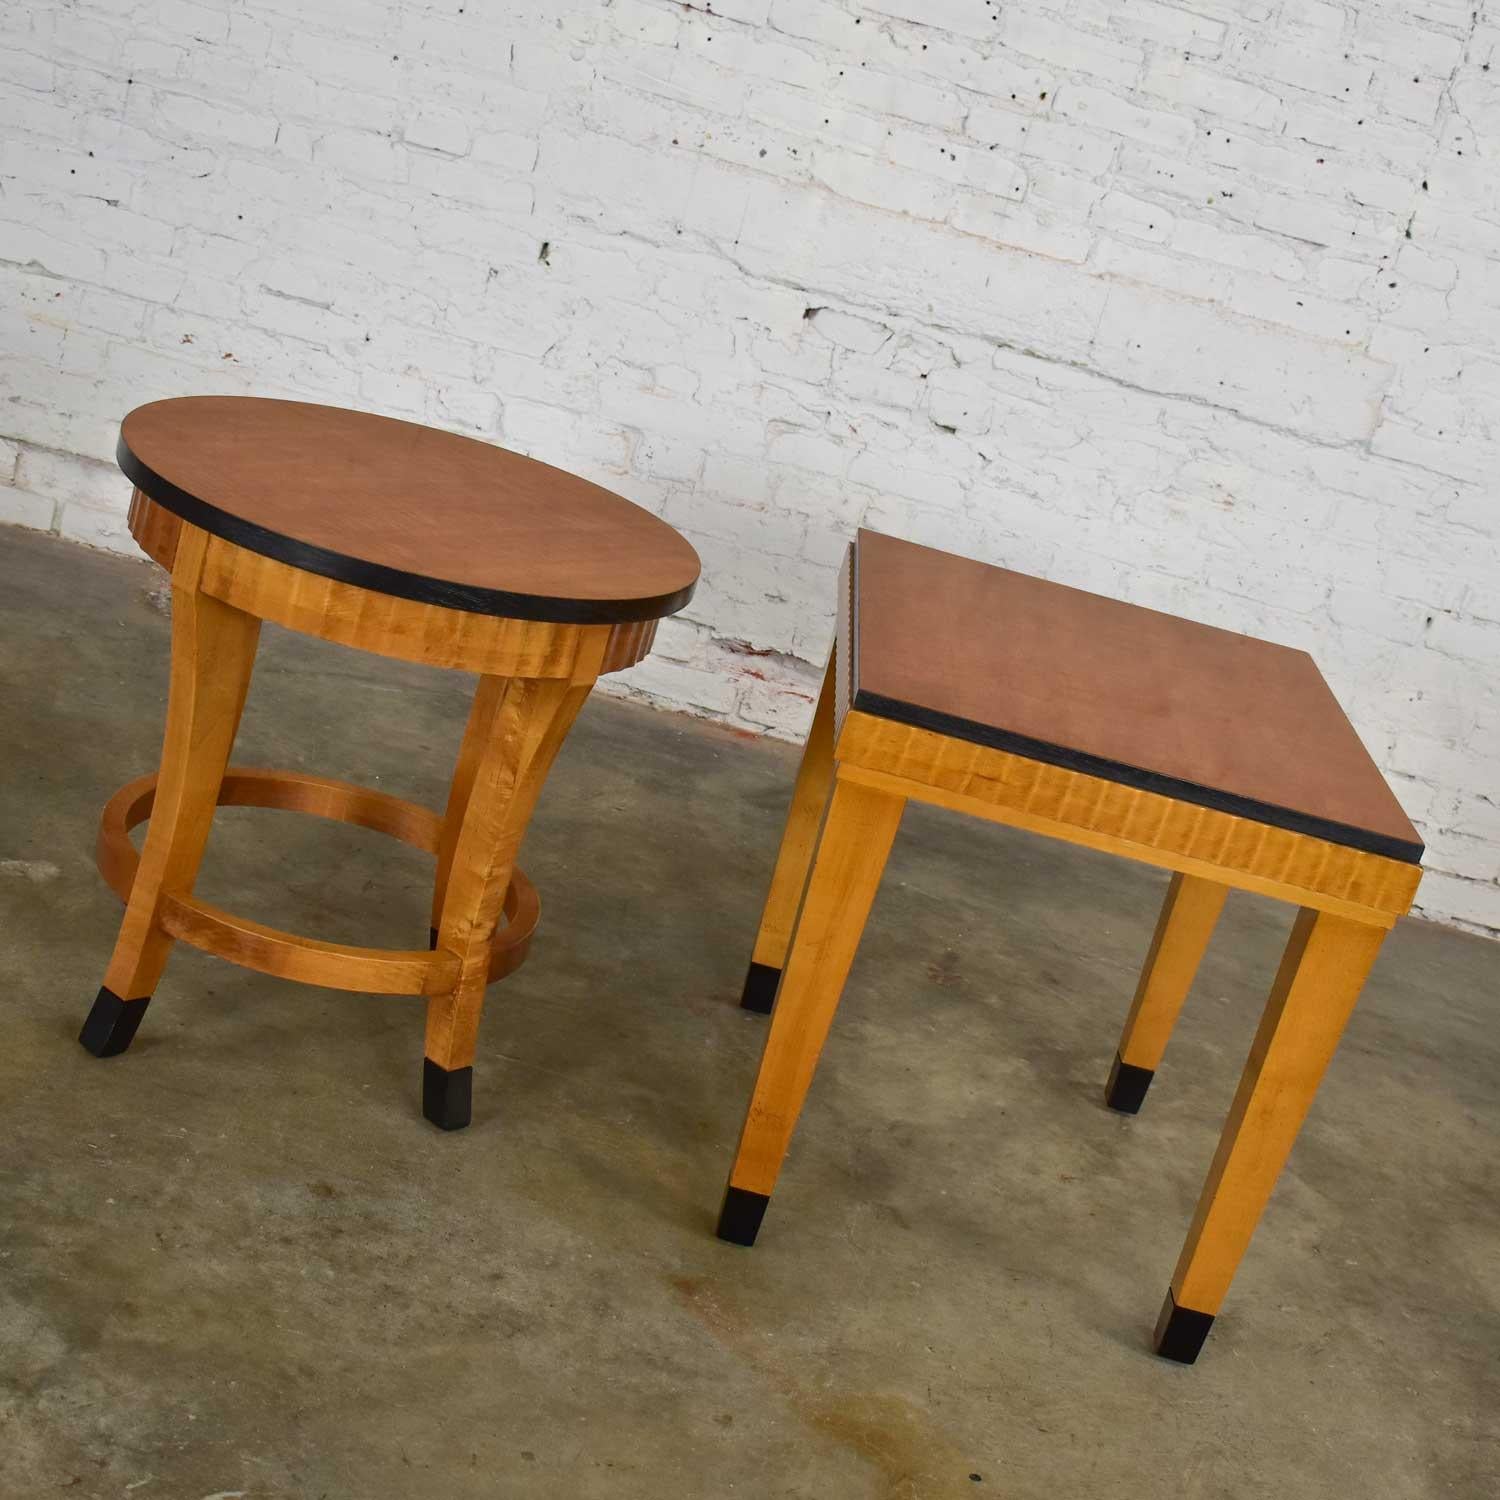 Stunning pair of Lane art deco revival end tables one rectangle and one round. Comprised of beautiful mid-toned wood and black painted accents on edges and sabots. Wonderful condition with a few minor touch ups and age-appropriate wear as you would